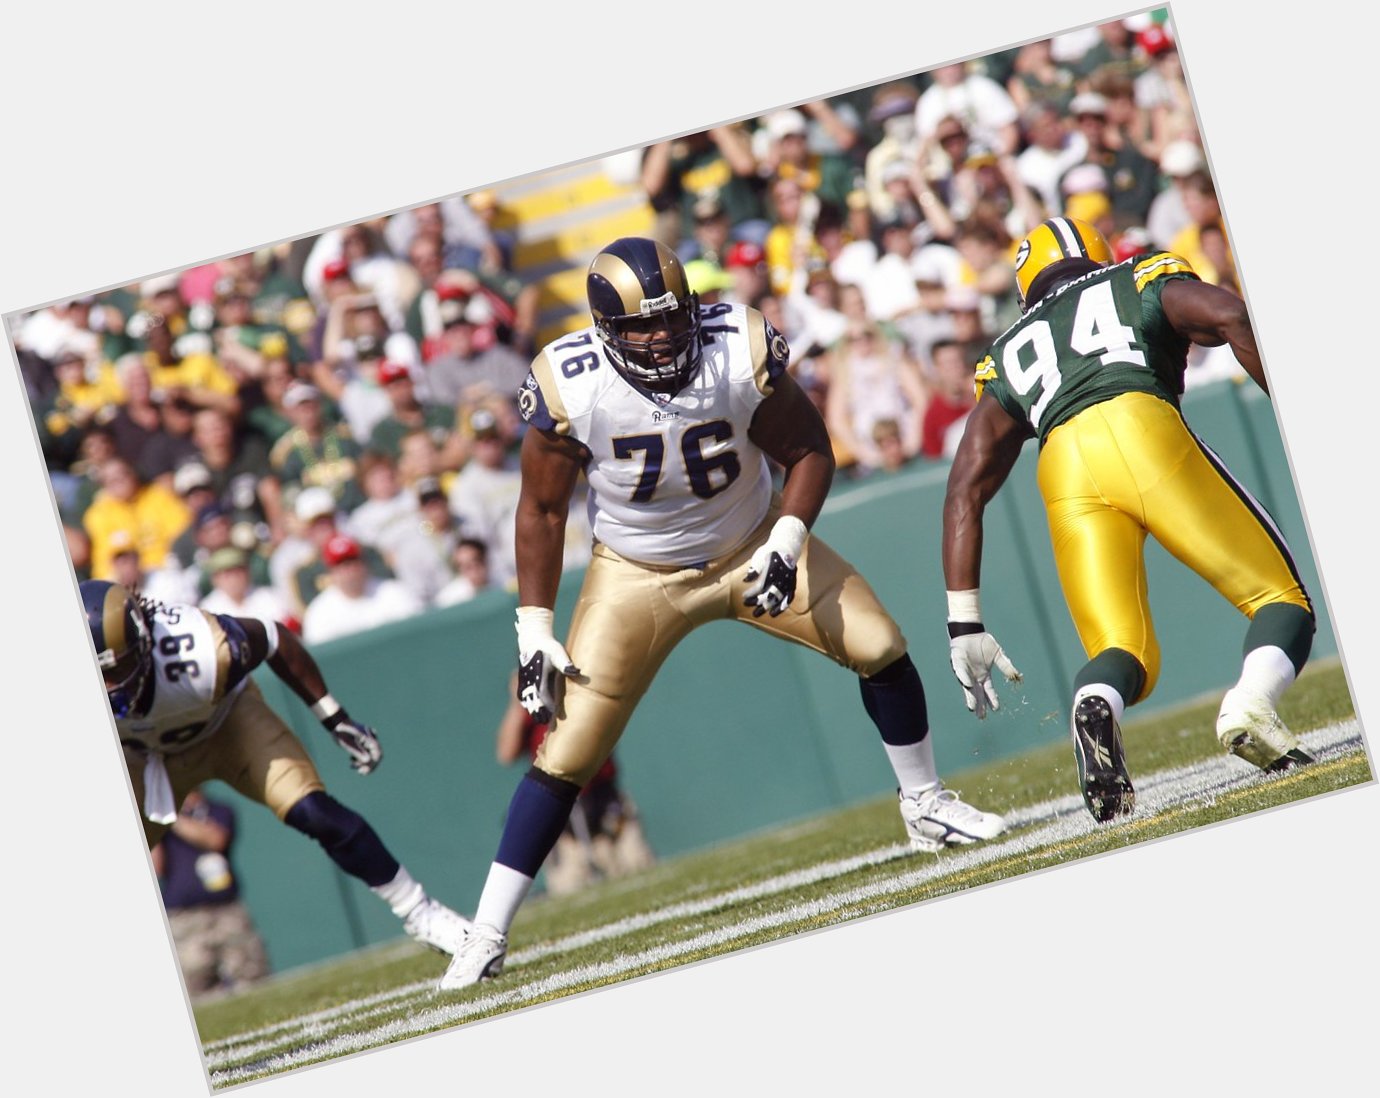 Happy Birthday to Orlando Pace who turns 42 today! 